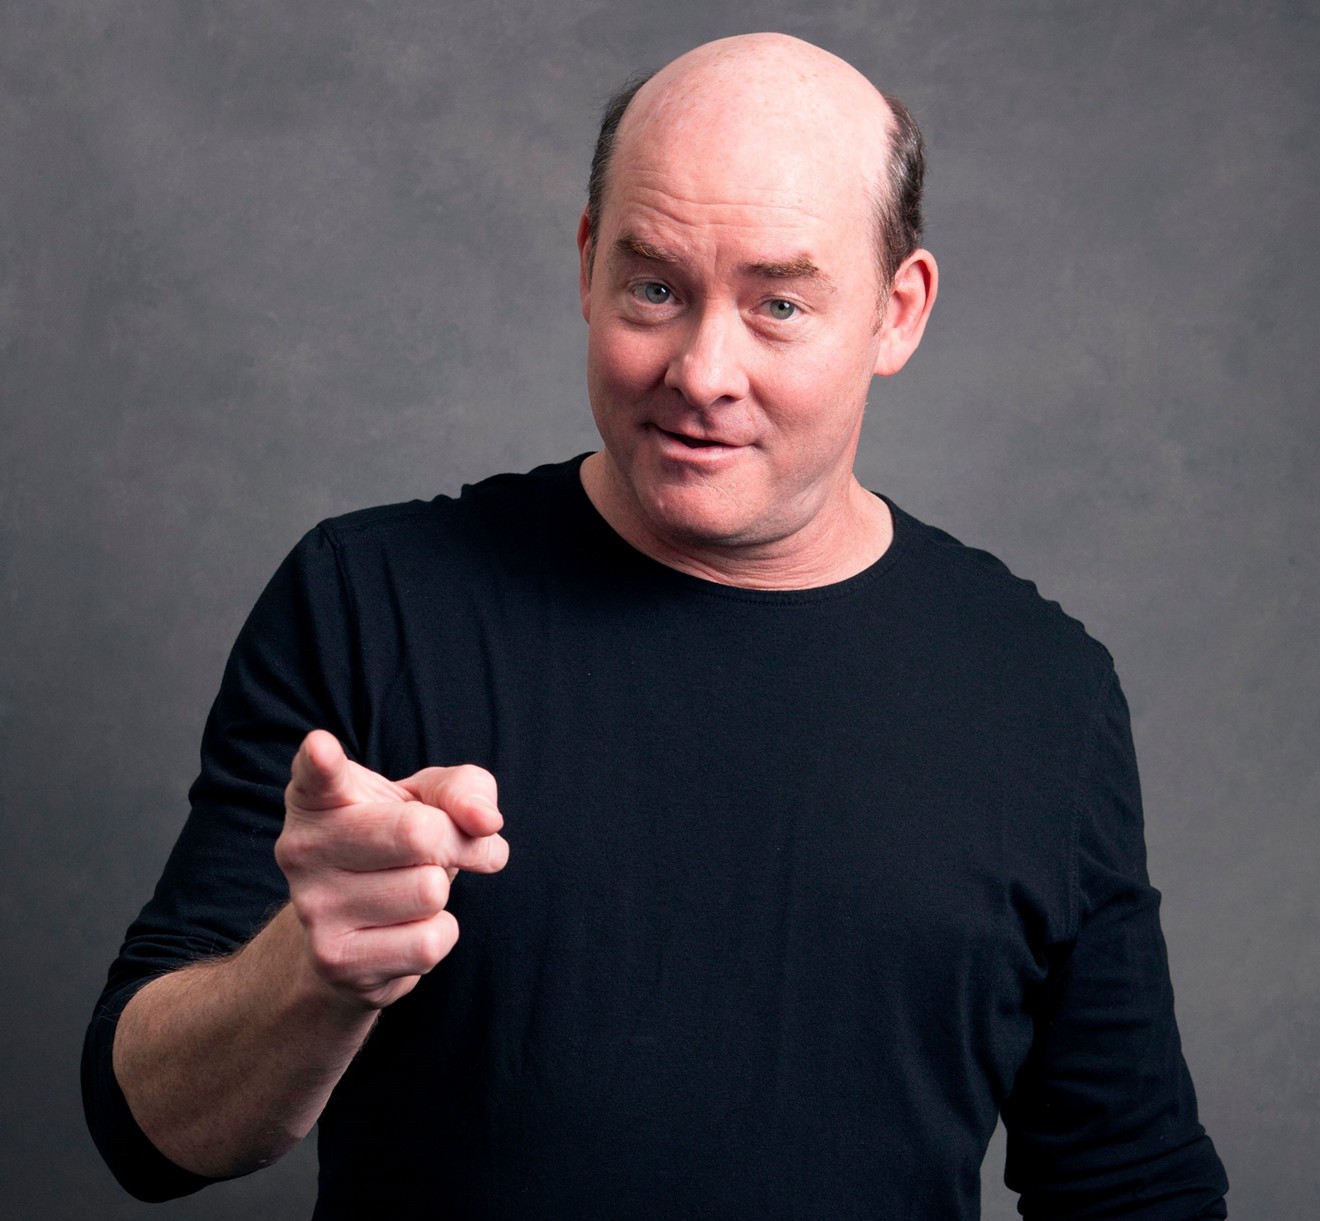 The Office and Anchorman star David Koechner is performing this Thursday, Friday and Saturday at The Plano House of Comedy.